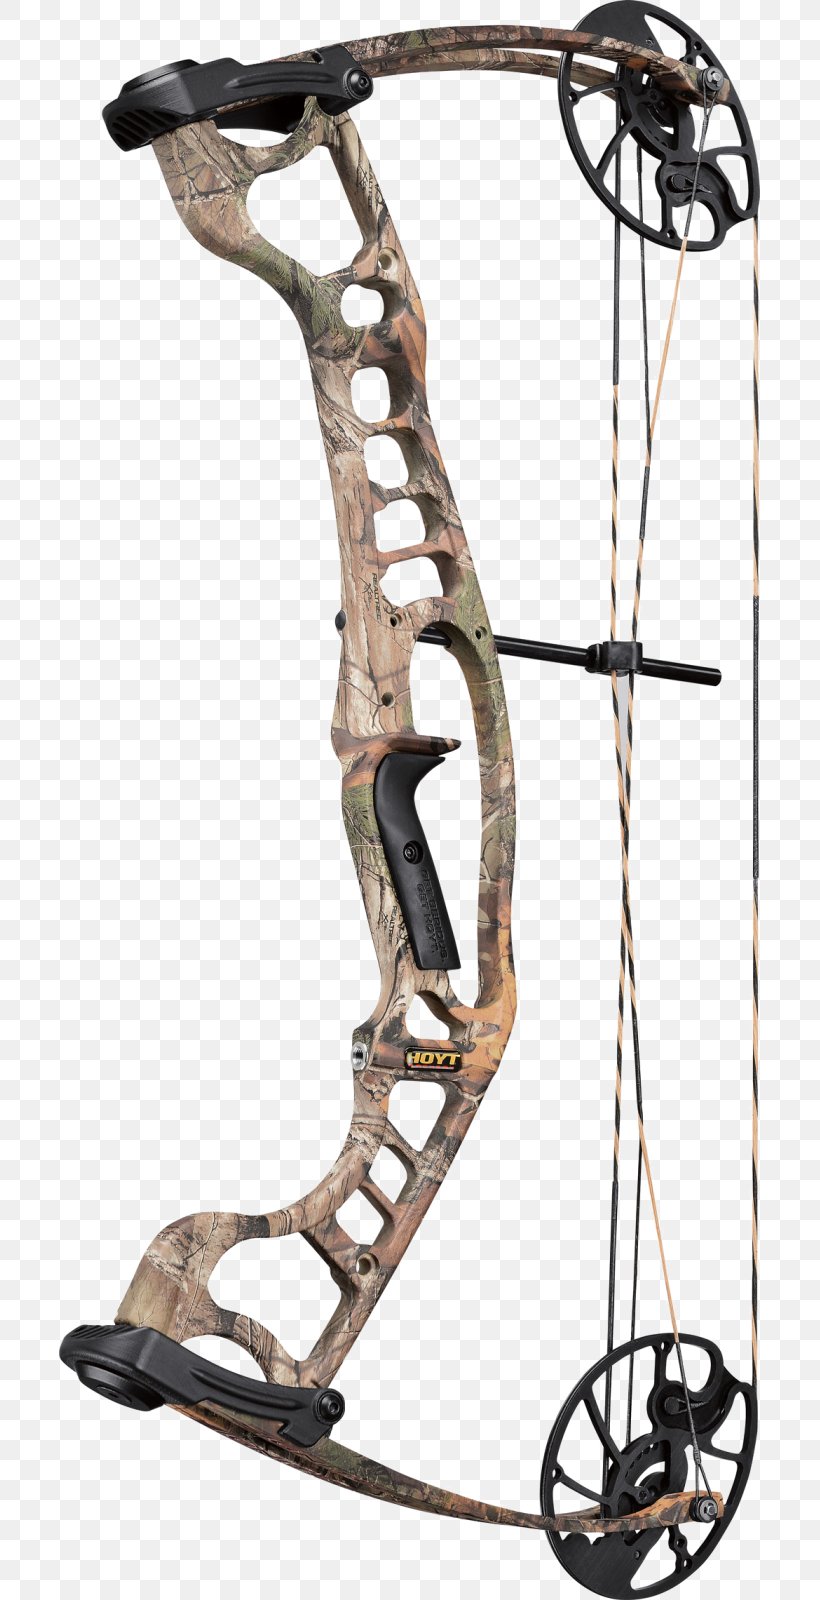 Compound Bows Bow And Arrow Bowhunting Recurve Bow, PNG, 701x1600px, Compound Bows, Archery, Bow, Bow And Arrow, Bowhunting Download Free